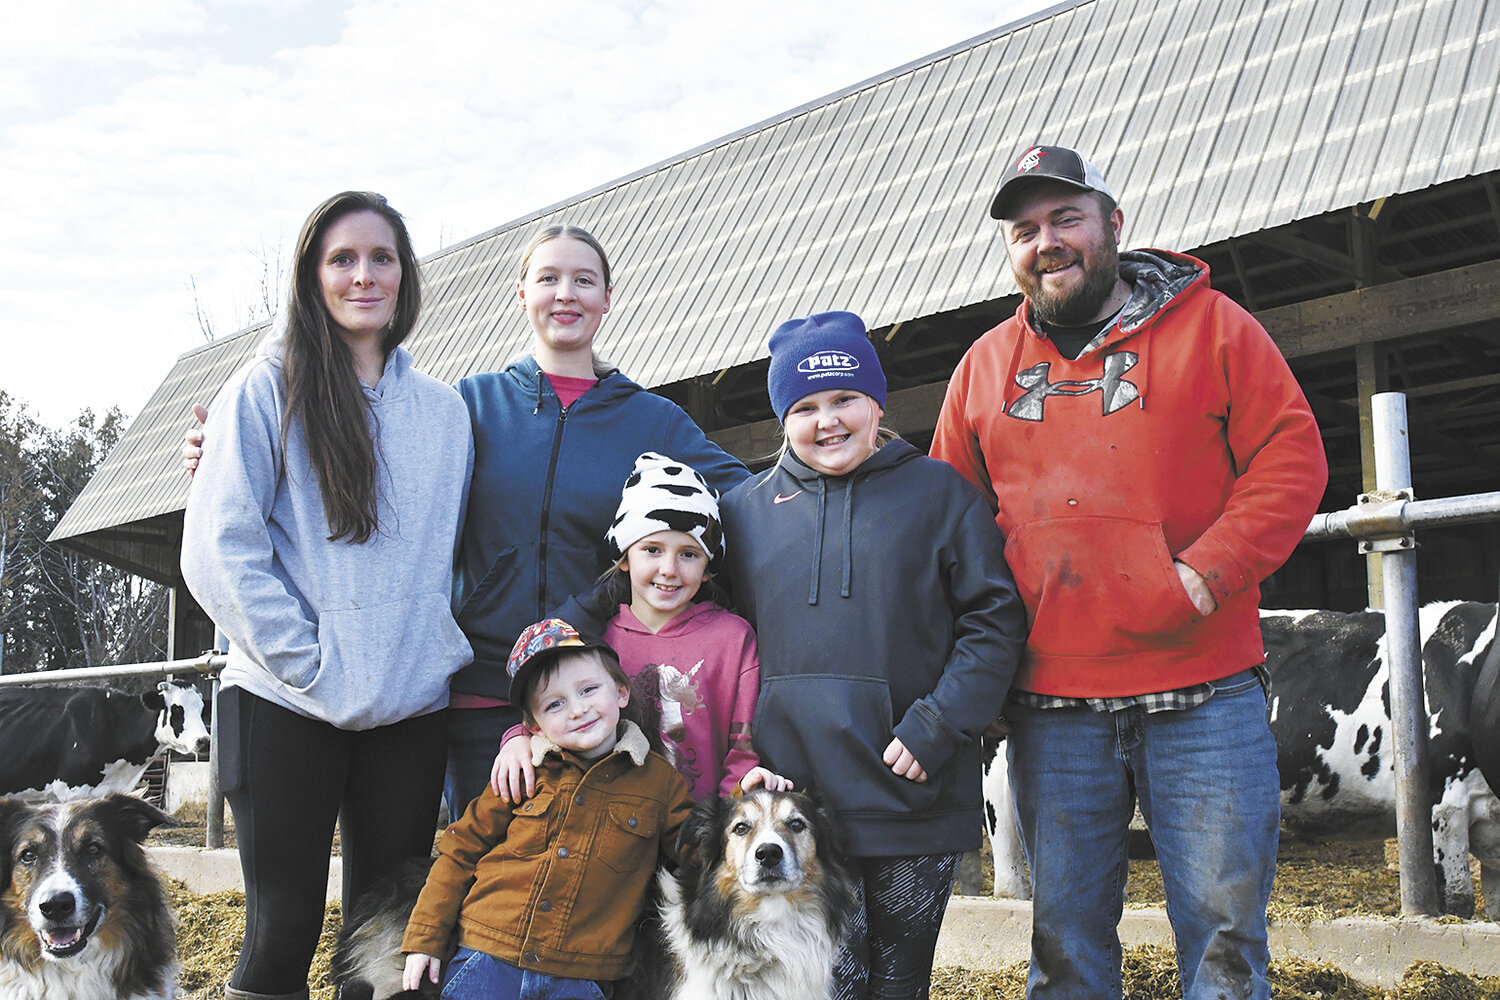 Ryan Eipers Jr. (front, from left) and Eva Eipers; (back, from left) Niki Eipers, Emily Willette, nanny, Olivia Eipers and Ryan Eipers stand by their freestall barn Nov. 2 on their dairy farm near Dodge Center, Minnesota. The Eiperses milk 144 cows and farm 300 acres.